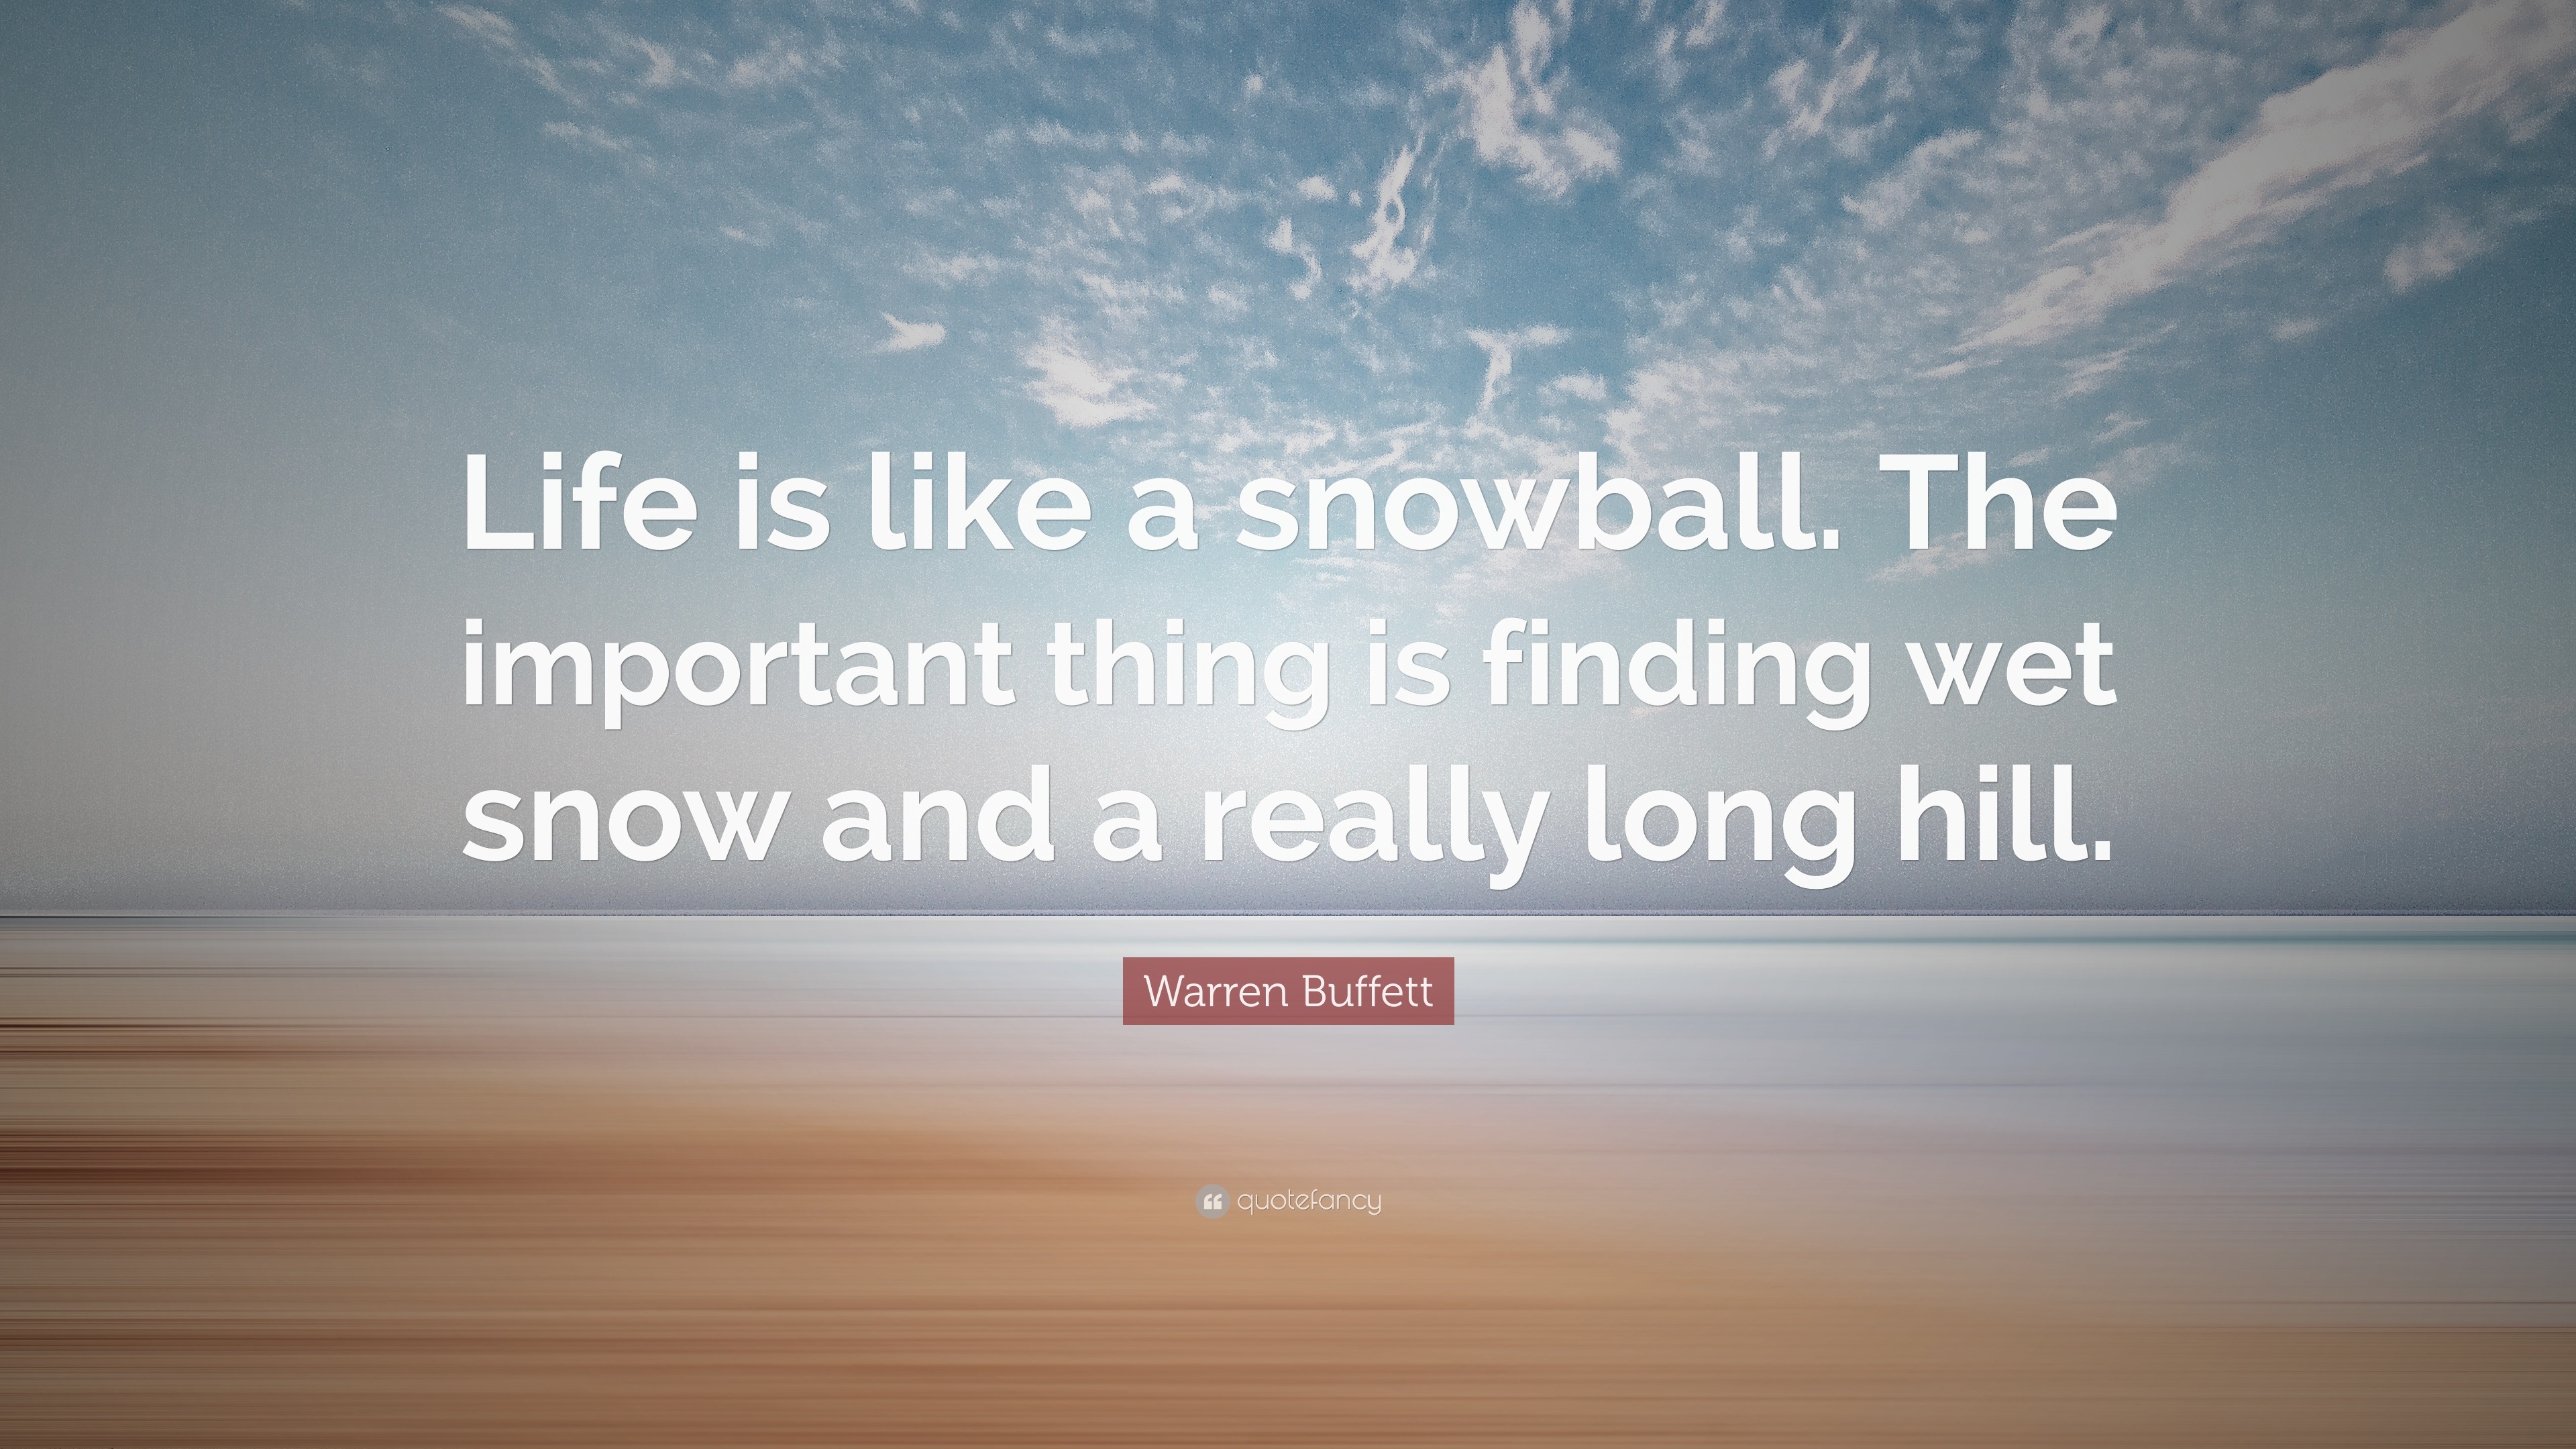 Warren Buffett Quote: “Life is like a snowball. The important thing is